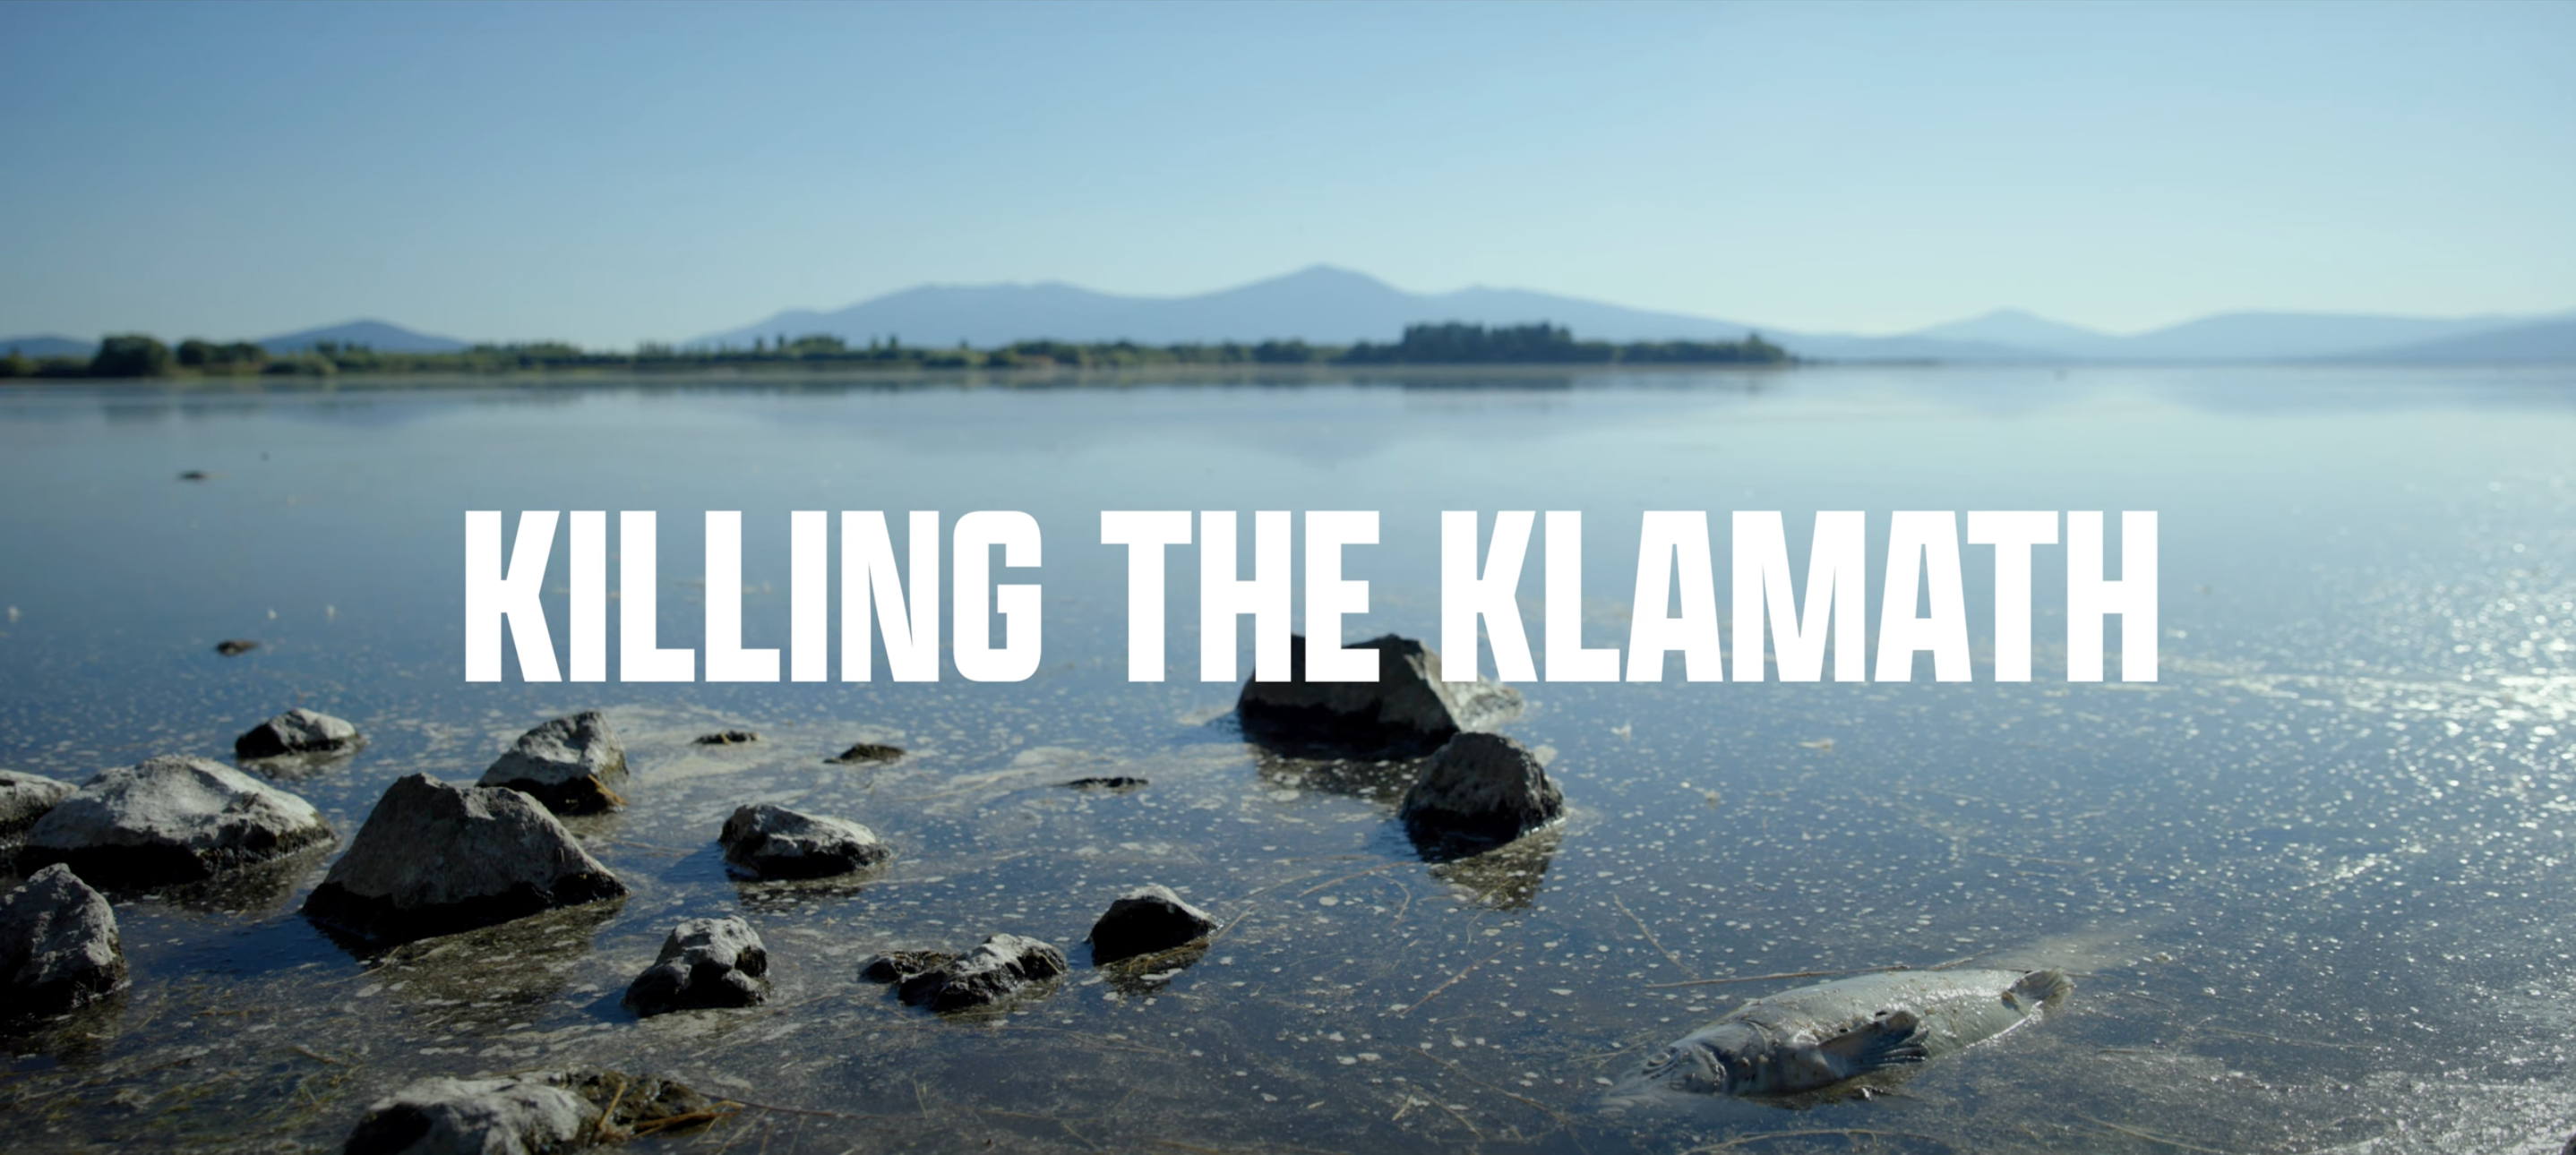 dead fish in polluted Klamath River water